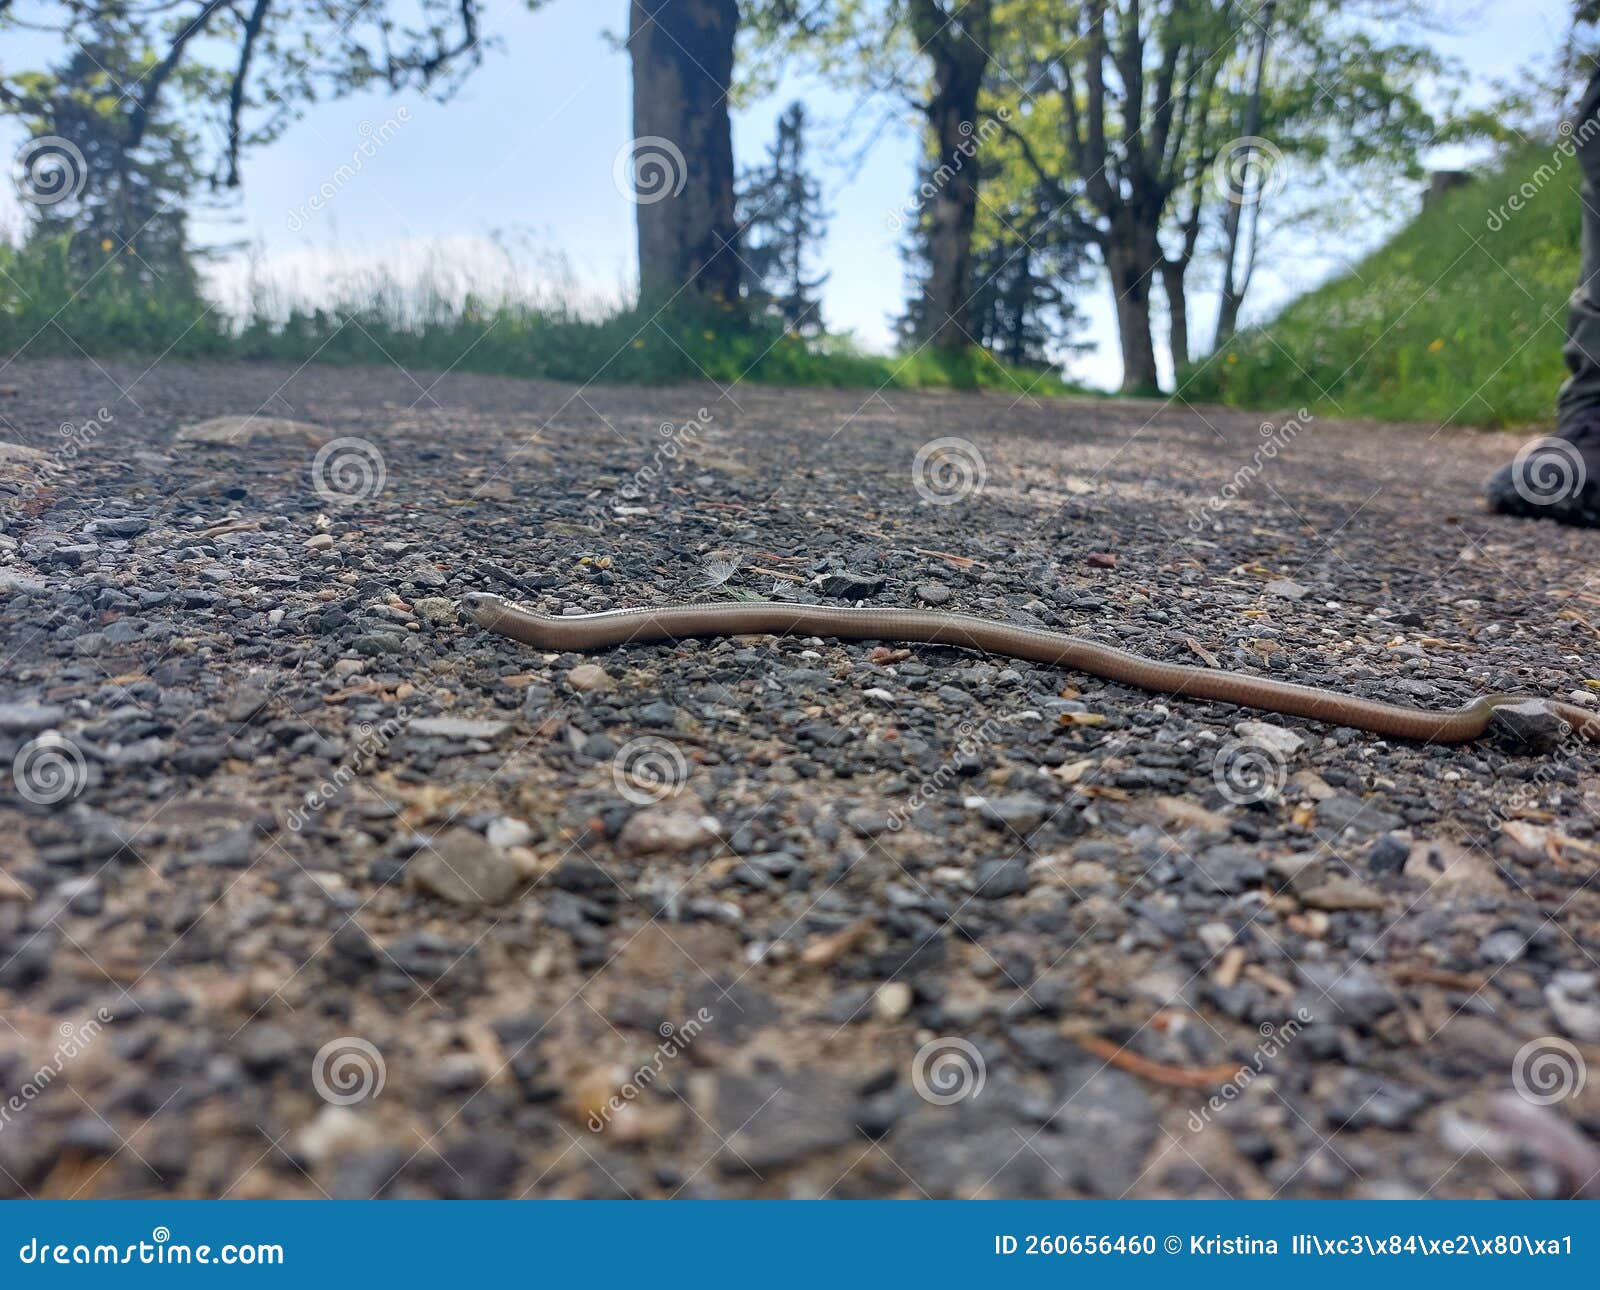 slow worm reptil